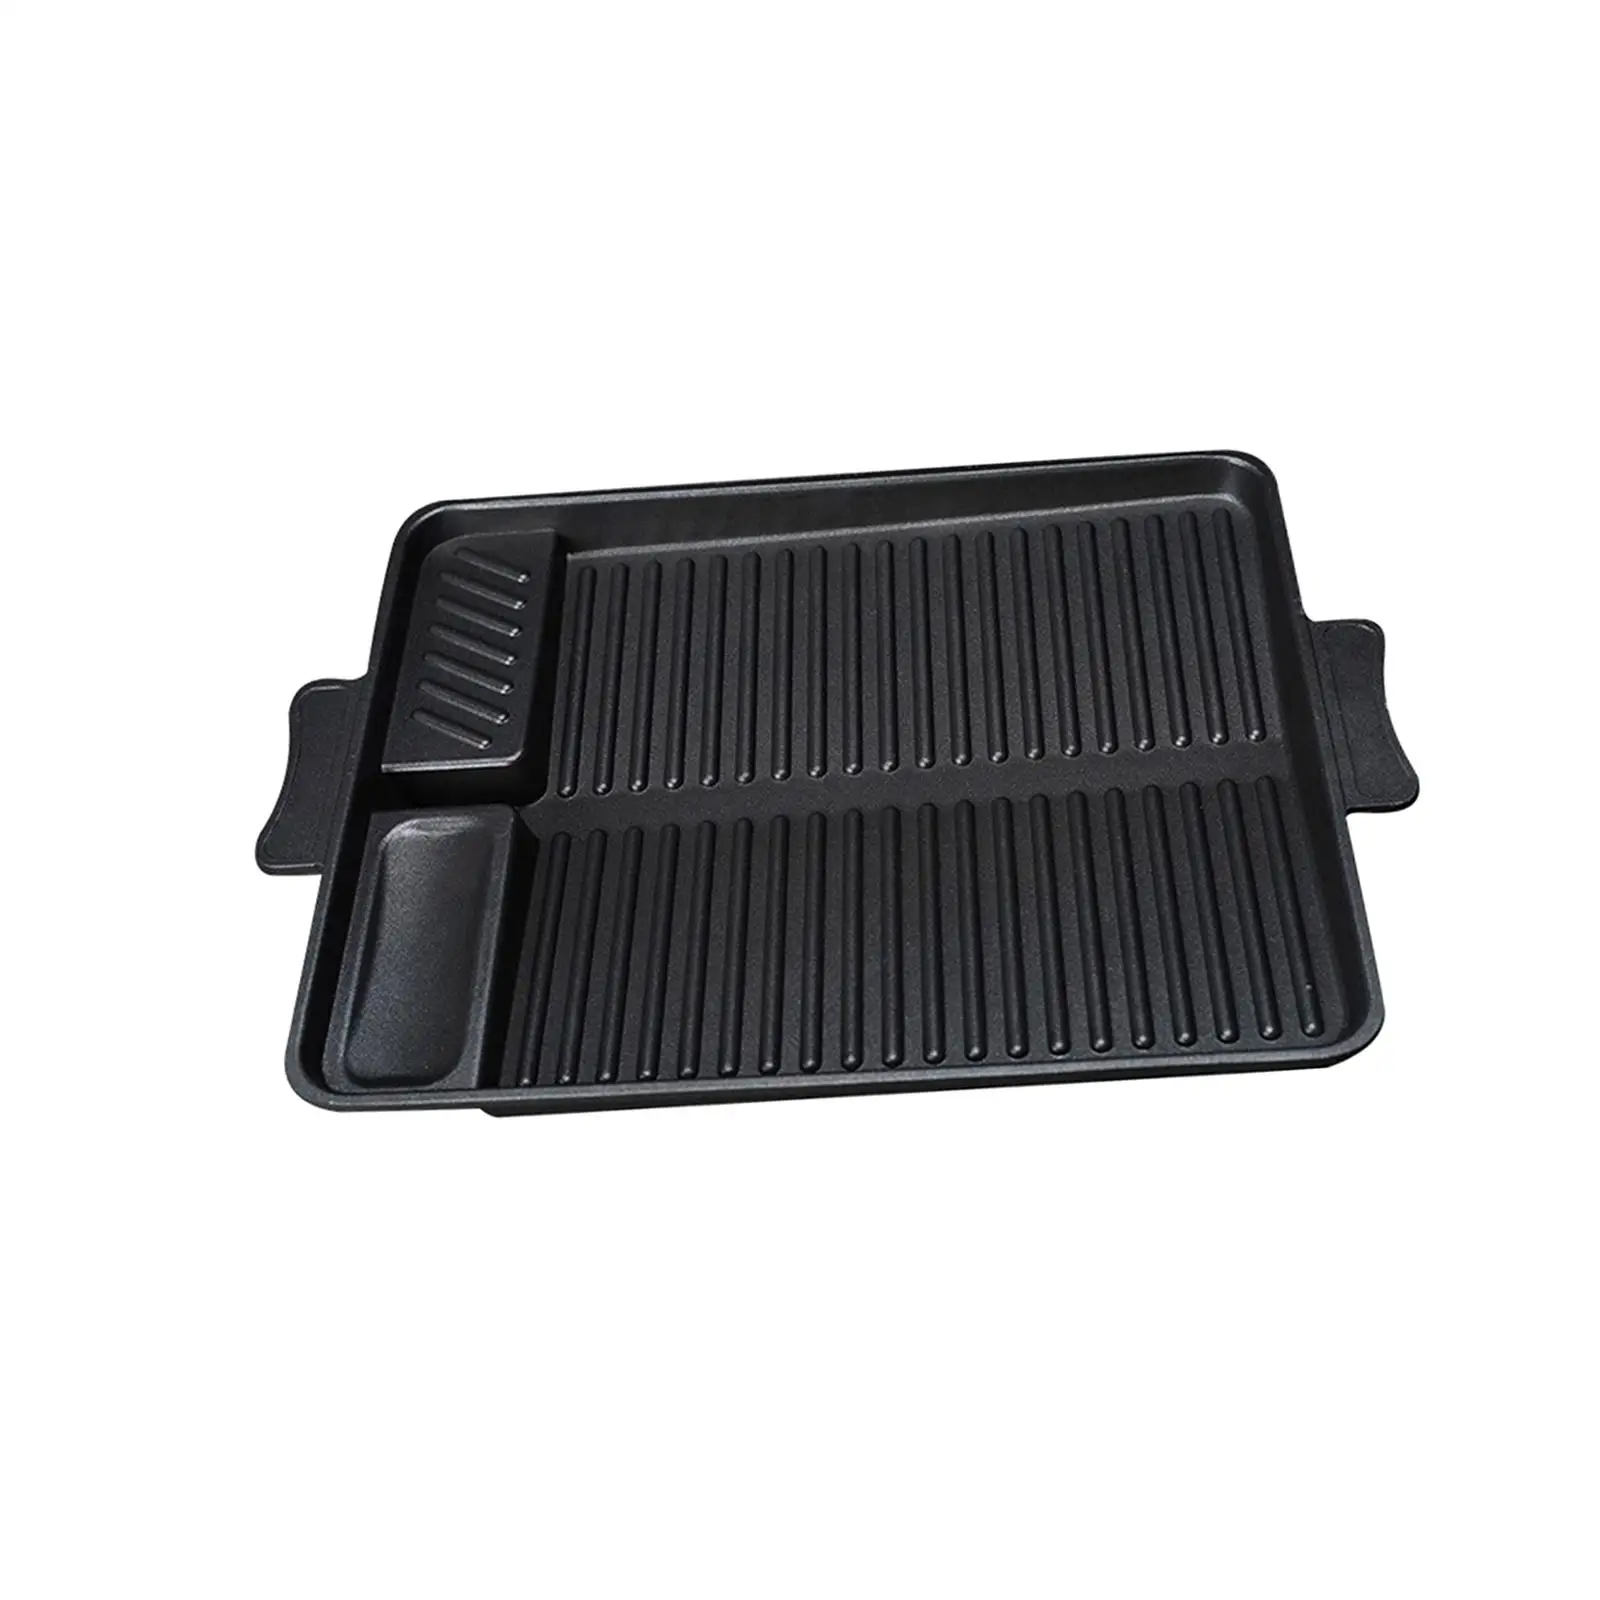 Portable Pan Griddle Plate Nonstick with Handle for Barbecue Outdoor Cooking